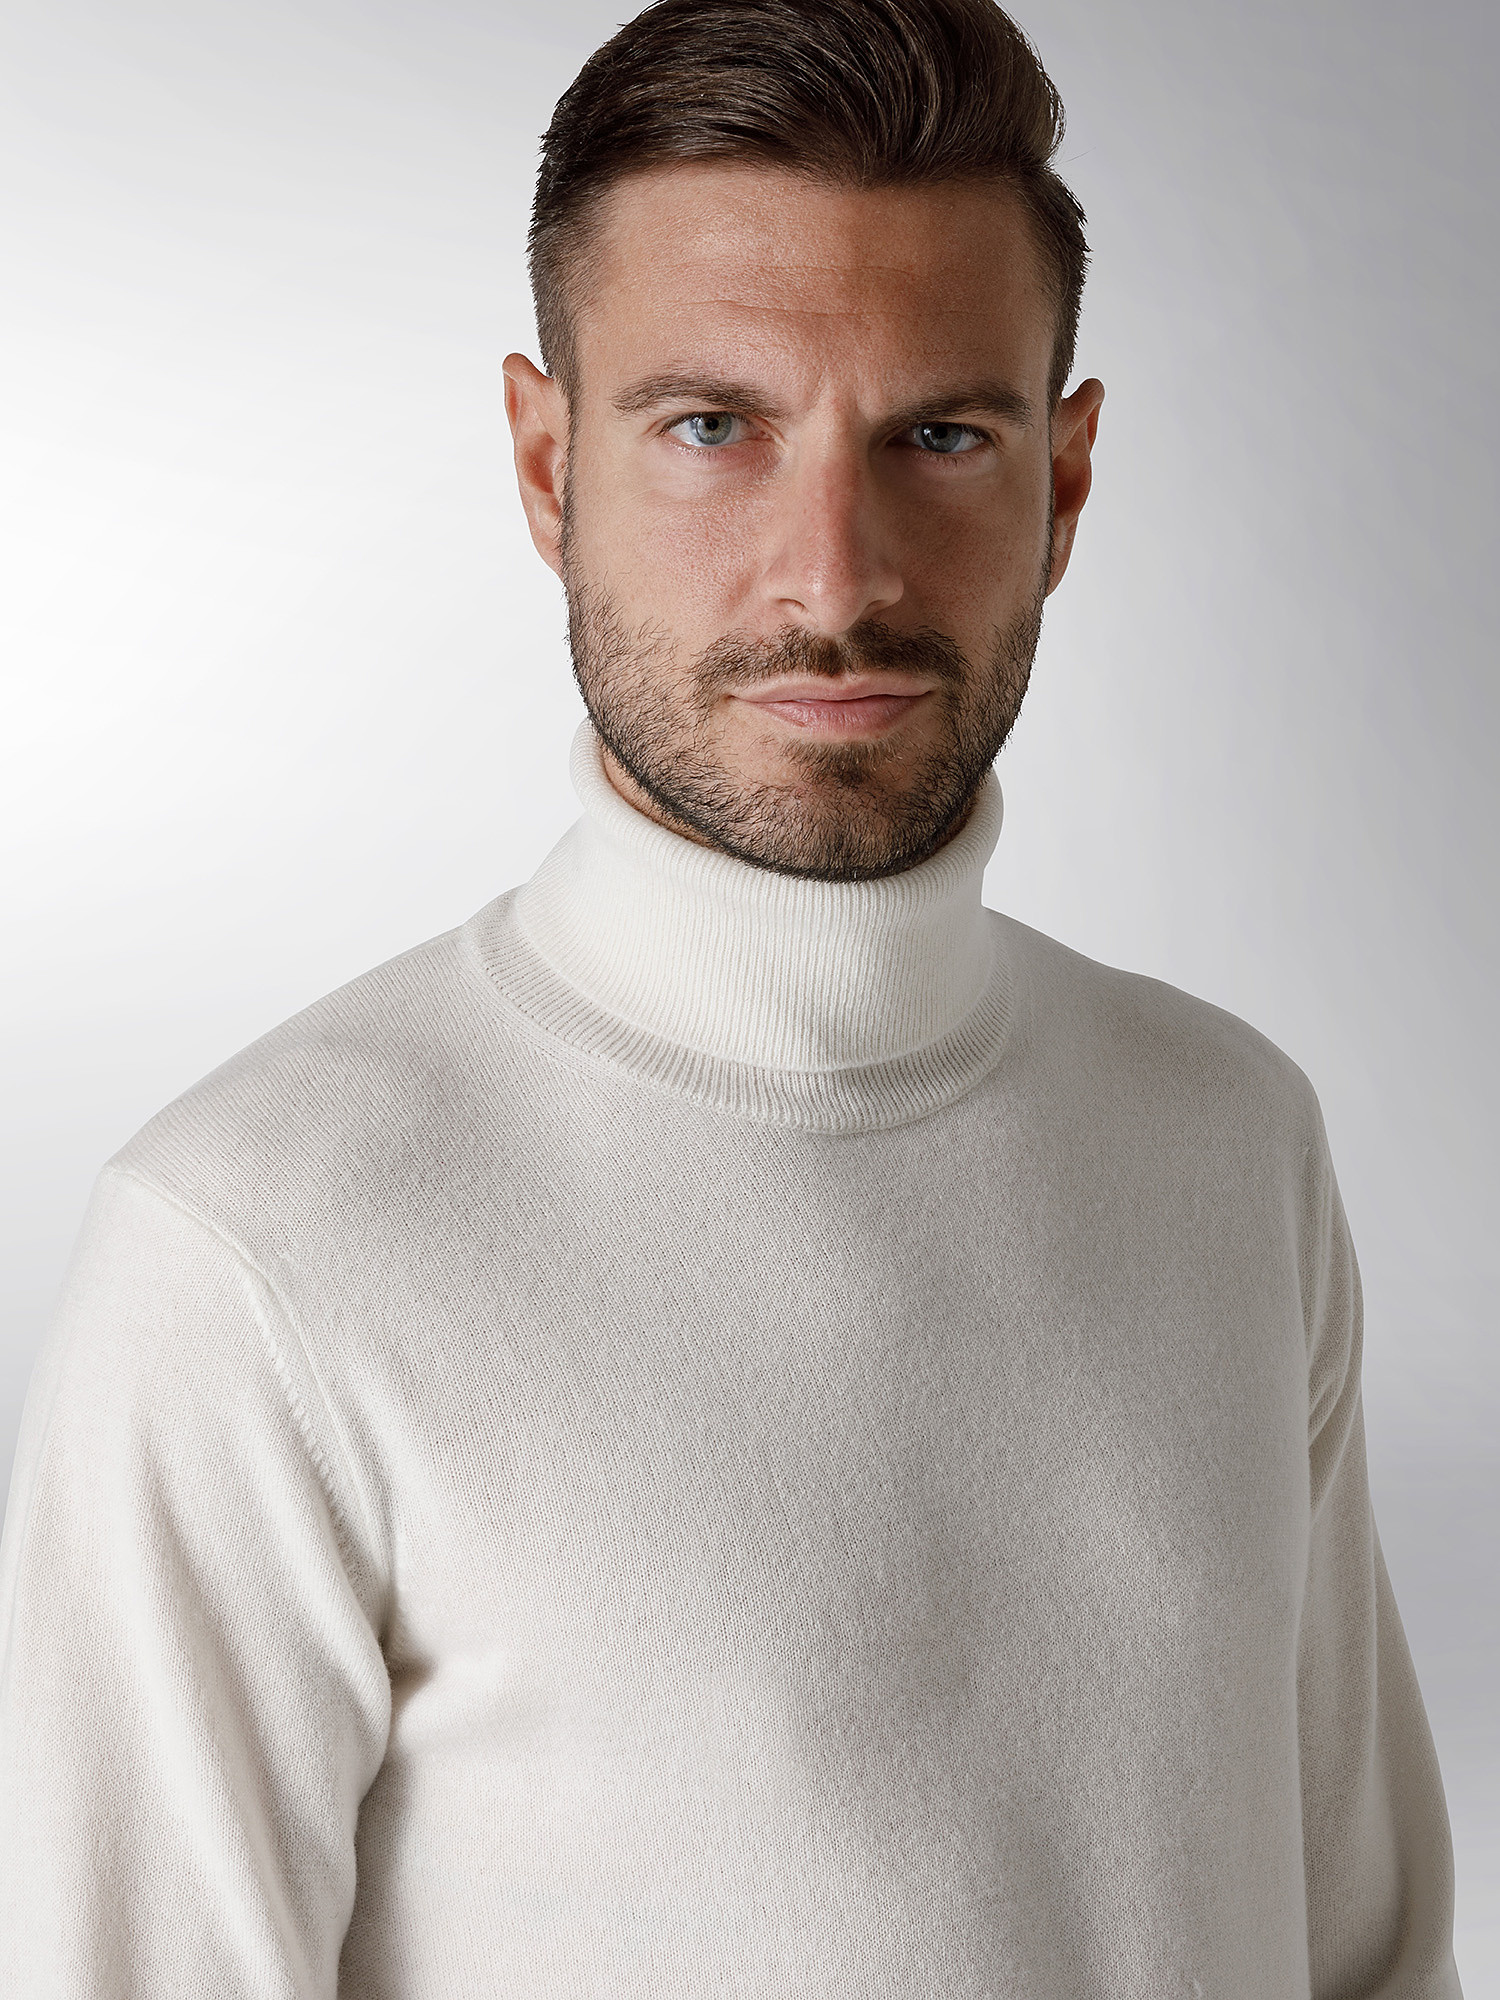 Coin Cashmere - Turtleneck in pure cashmere, White, large image number 3